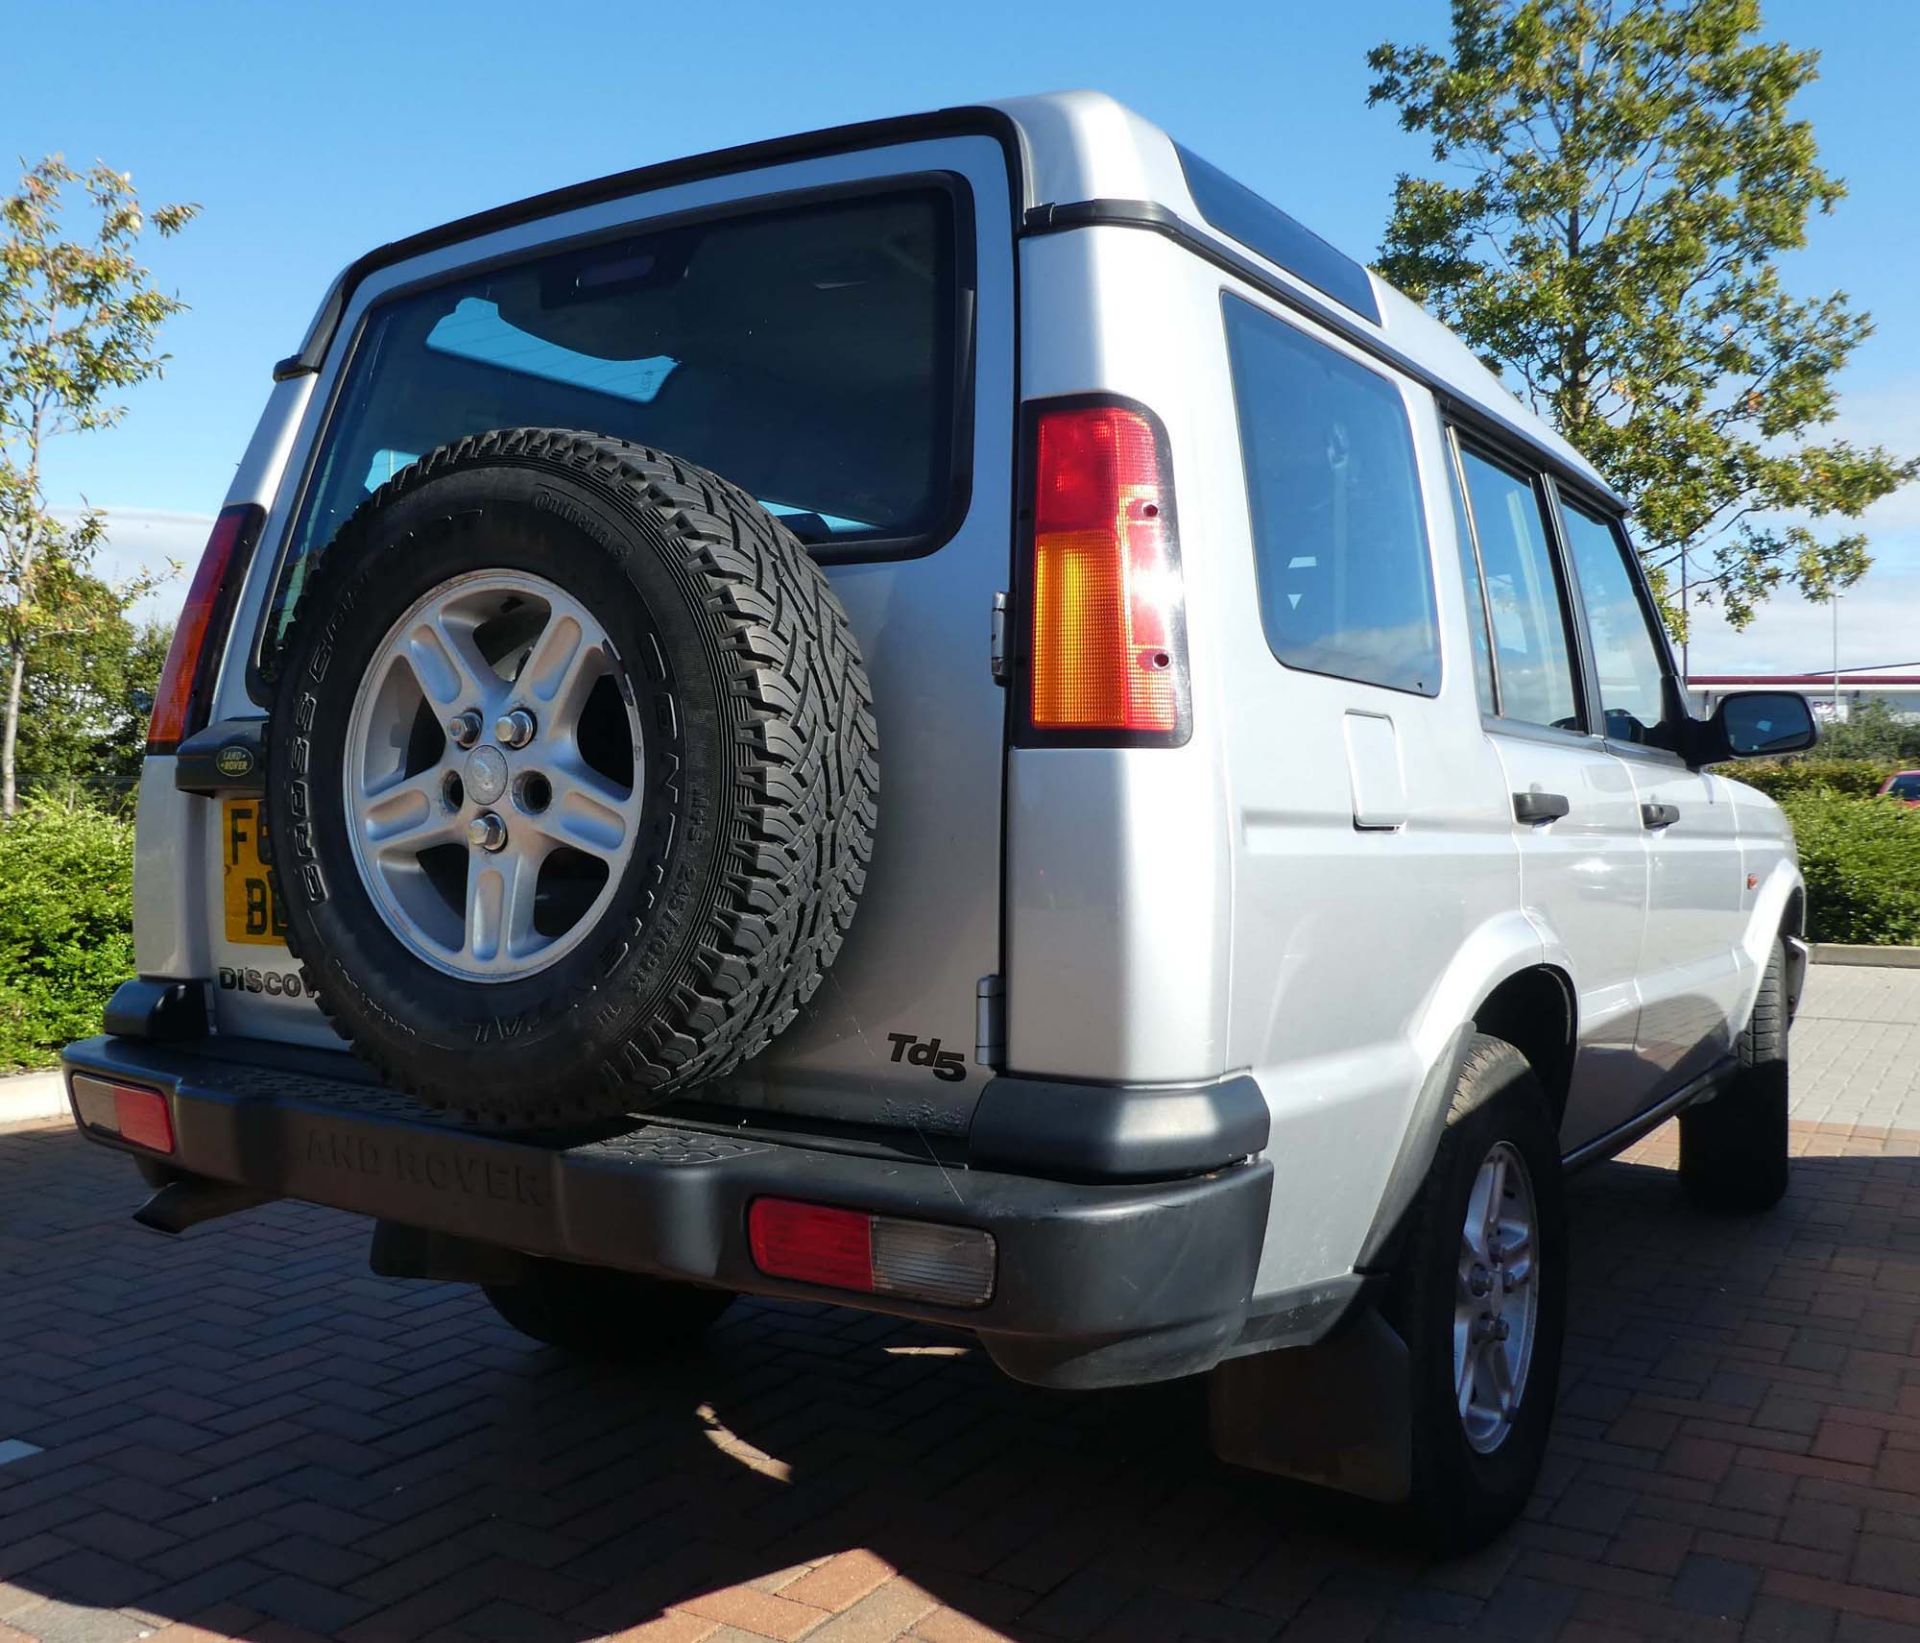 FC53 BET Land Rover Discovery TD5 S in silver, 2495cc, first registered 08.09.2003, diesel, approx - Image 11 of 11